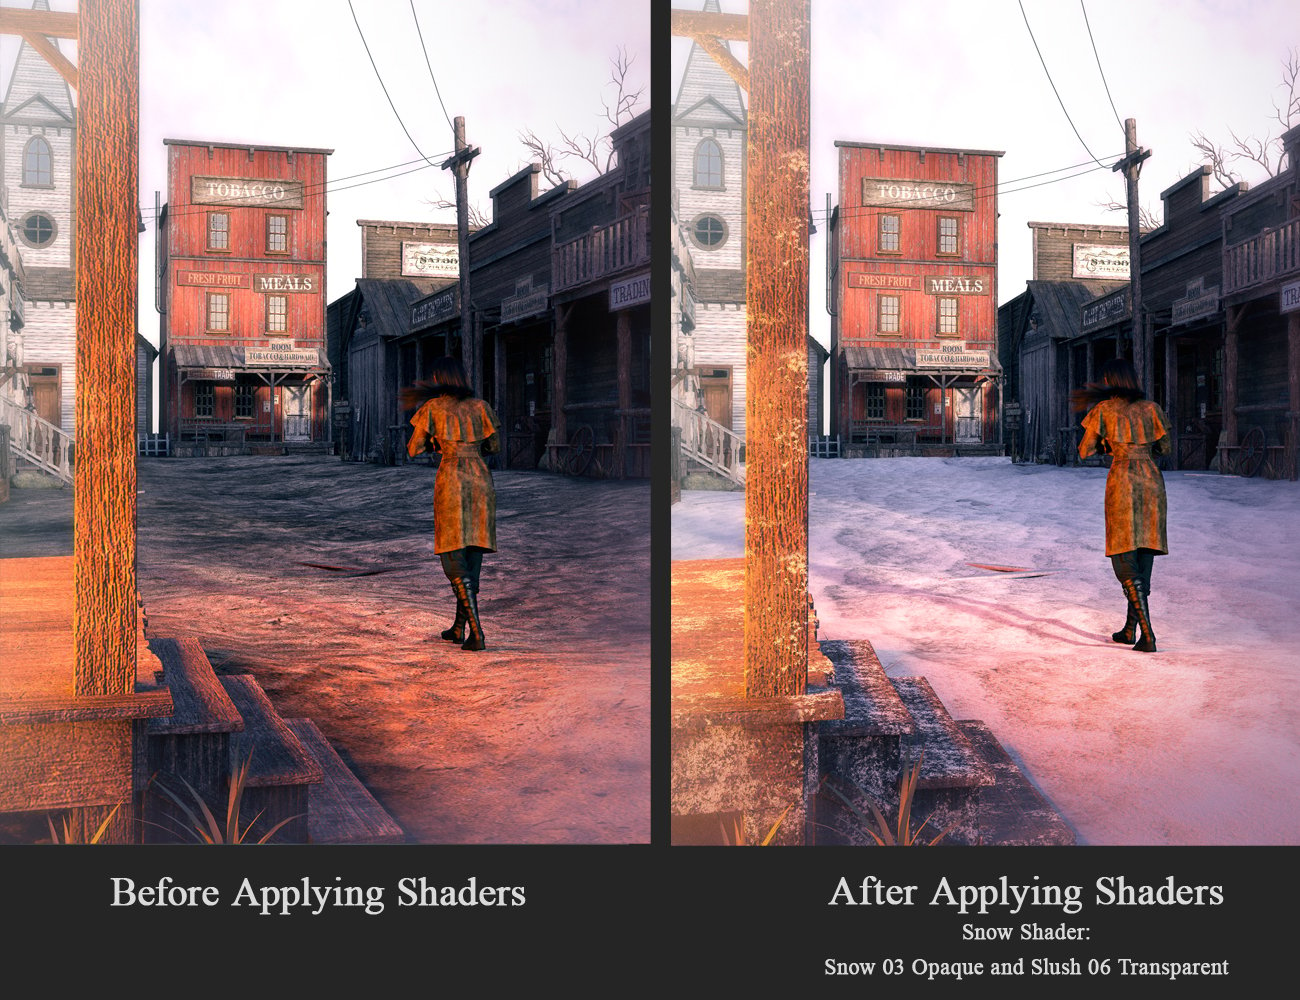 Before and After snow shaders applied to Wild West Town